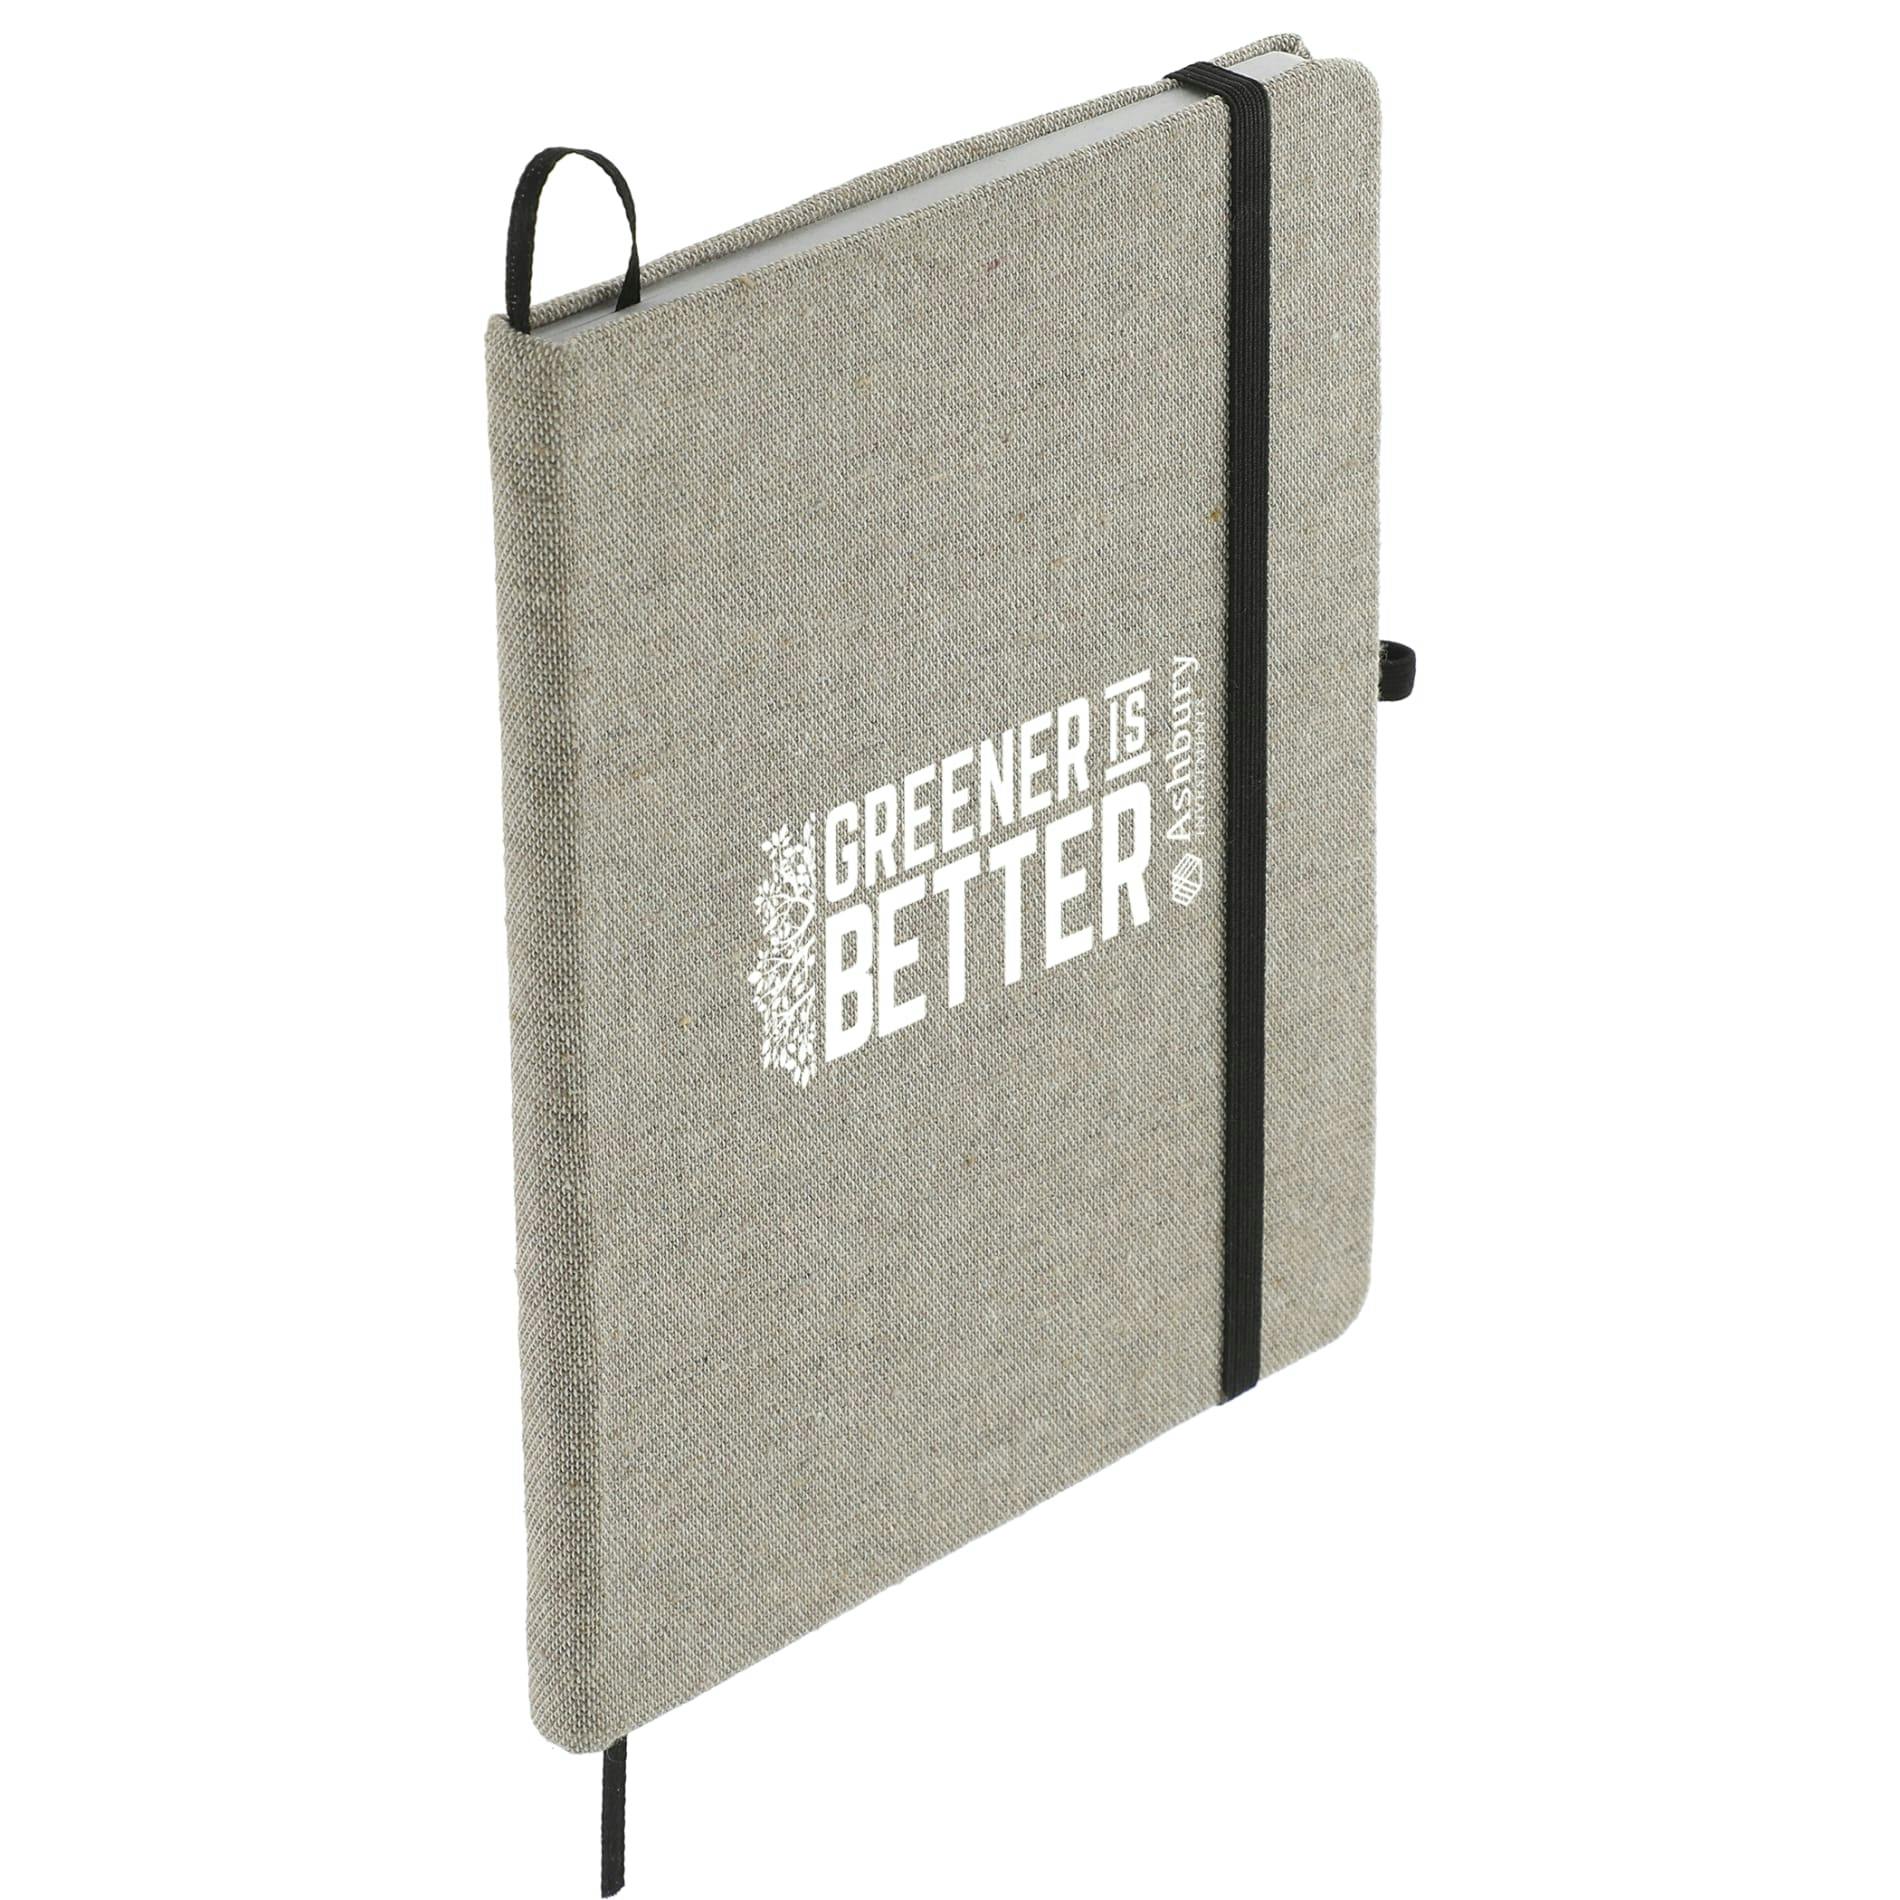 5" x 7" Recycled Cotton Bound Notebook - additional Image 1